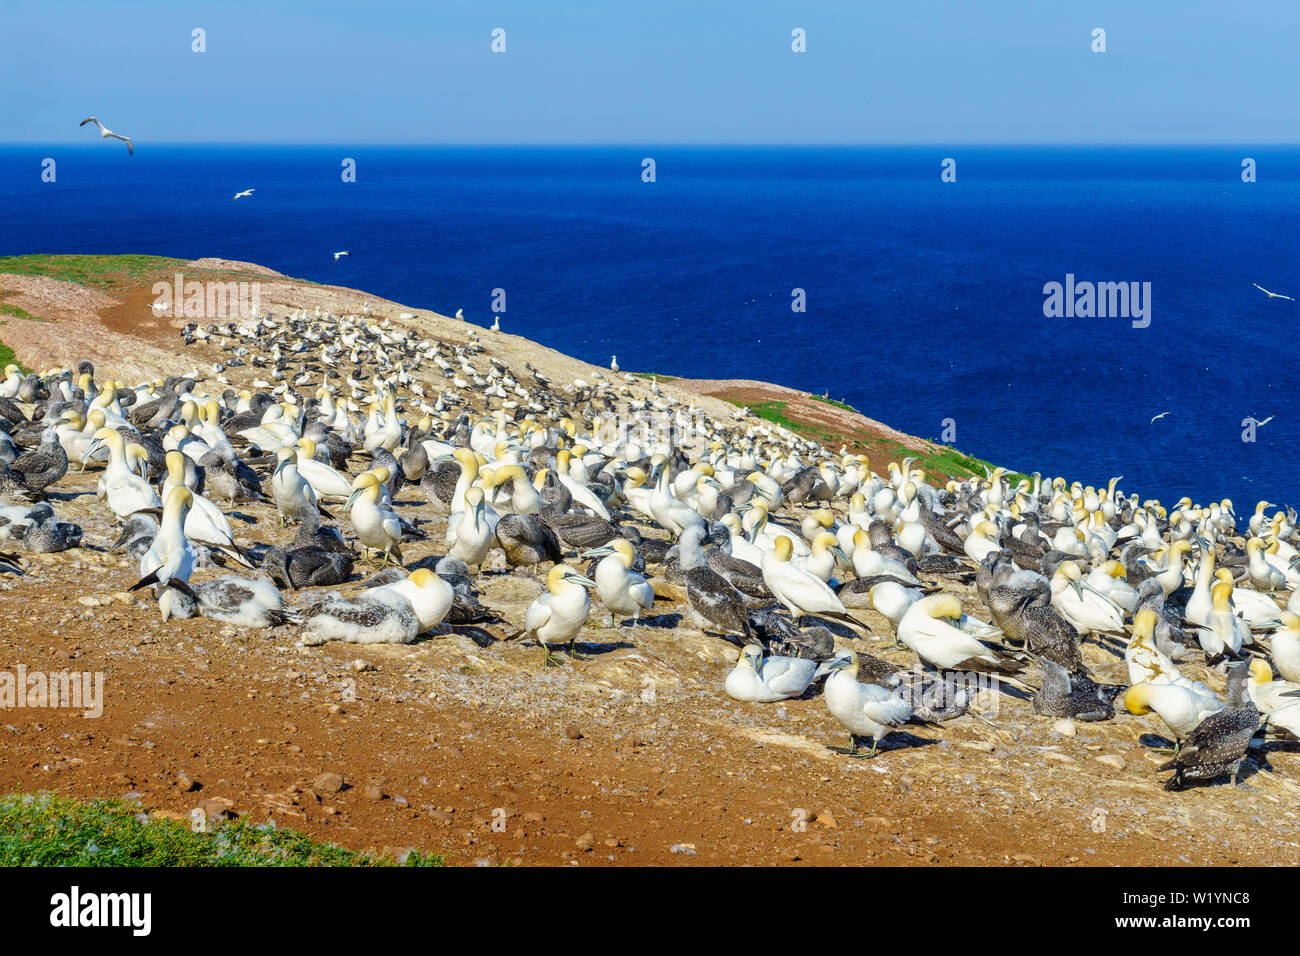 Colony of Gannet birds in the Bonaventure Island, near Perce, at the tip of Gaspe Peninsula, Quebec, Canada Stock Photo